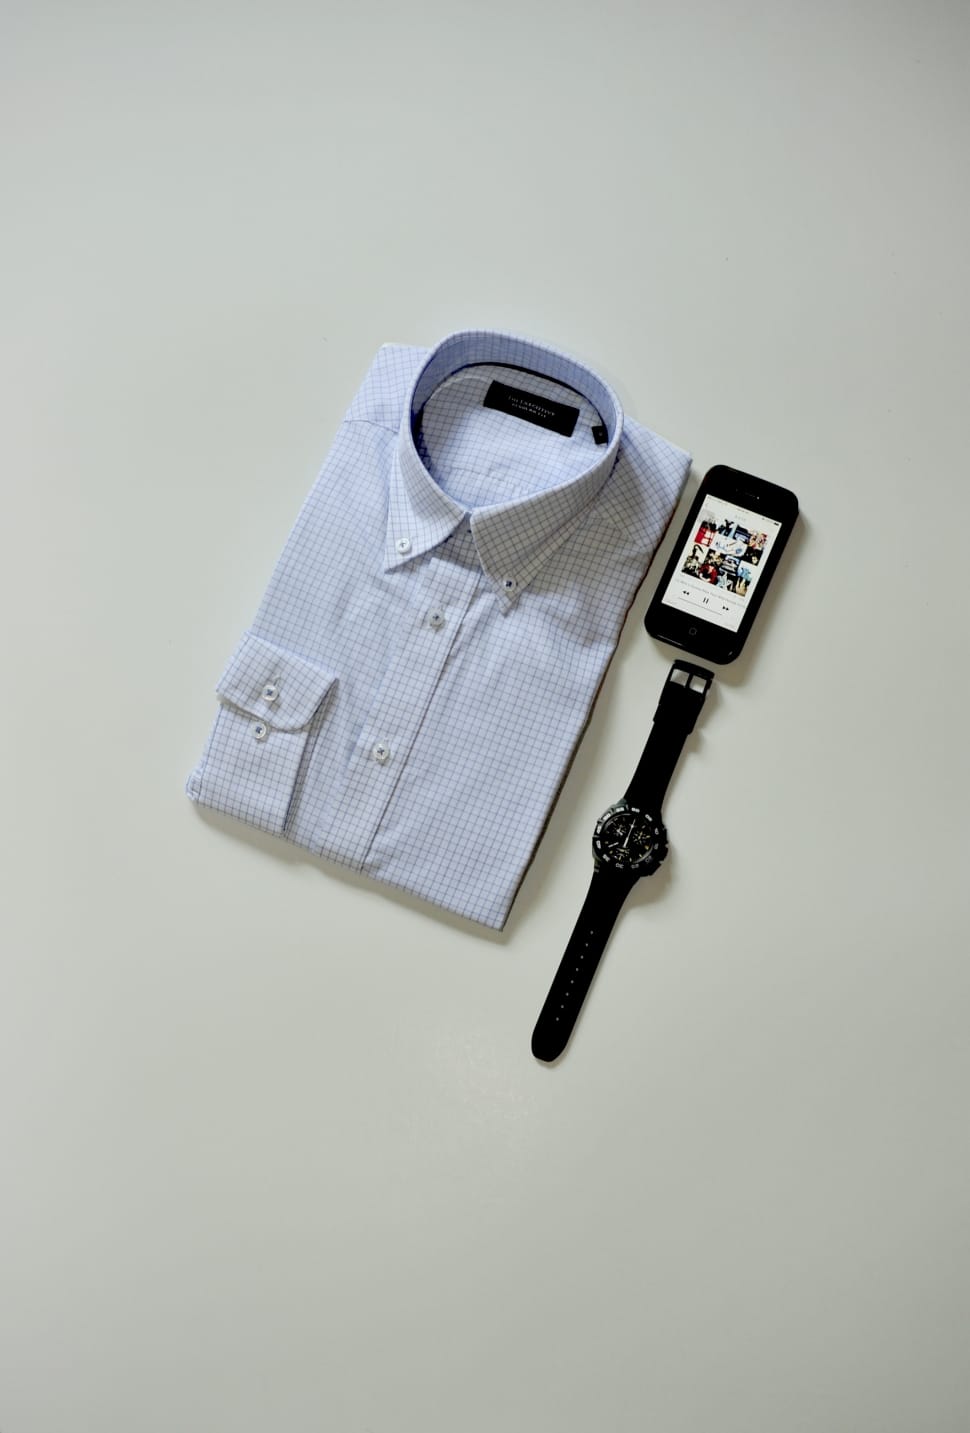 blue and white checked sport shirt and ipod touch and black watch preview